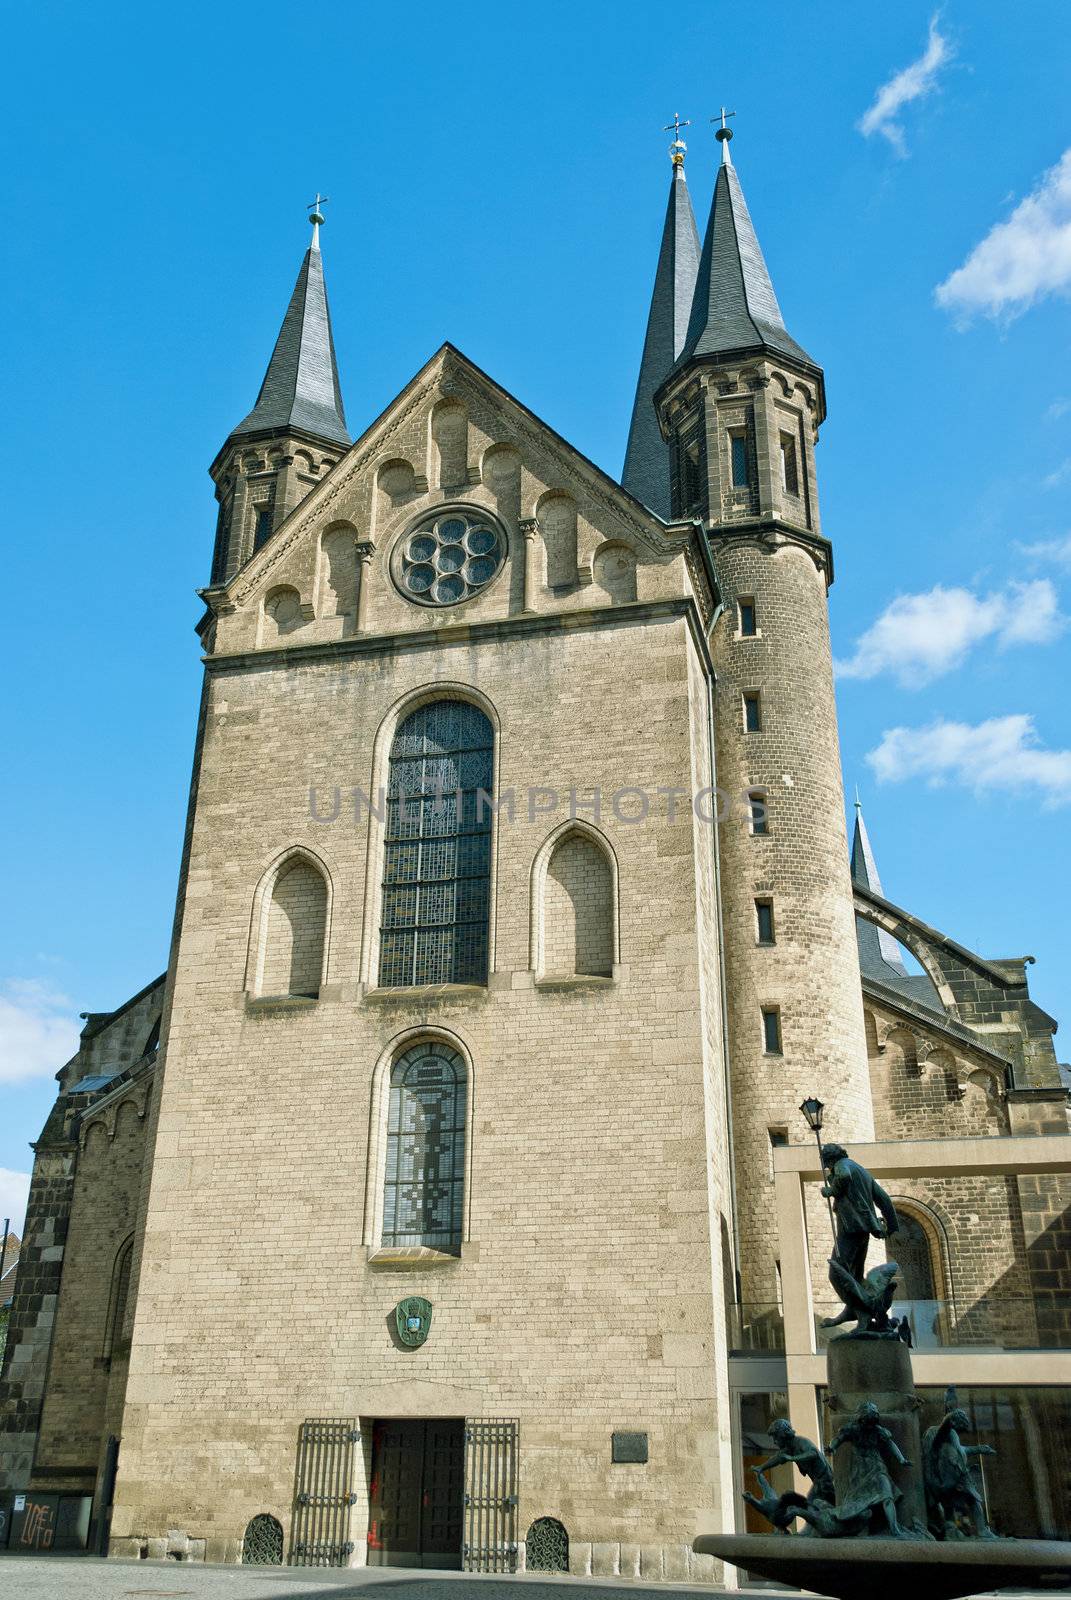 Minster, one of the oldest churches in Germany, emblem of the City of Bonn